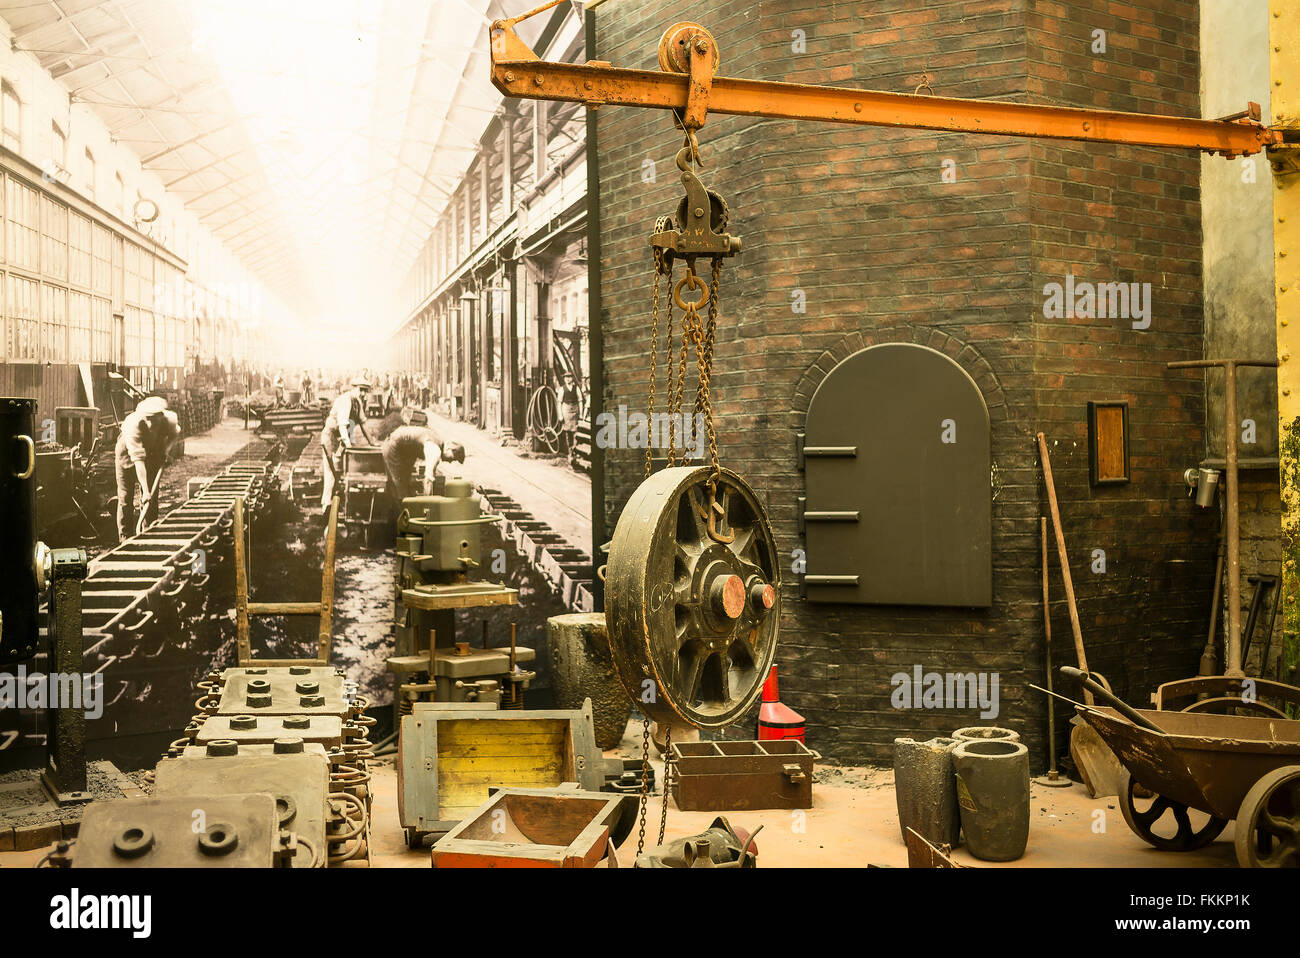 Industrial diarama in STEAM museum in Swindon UK showing historic forging of railway engineering products Stock Photo